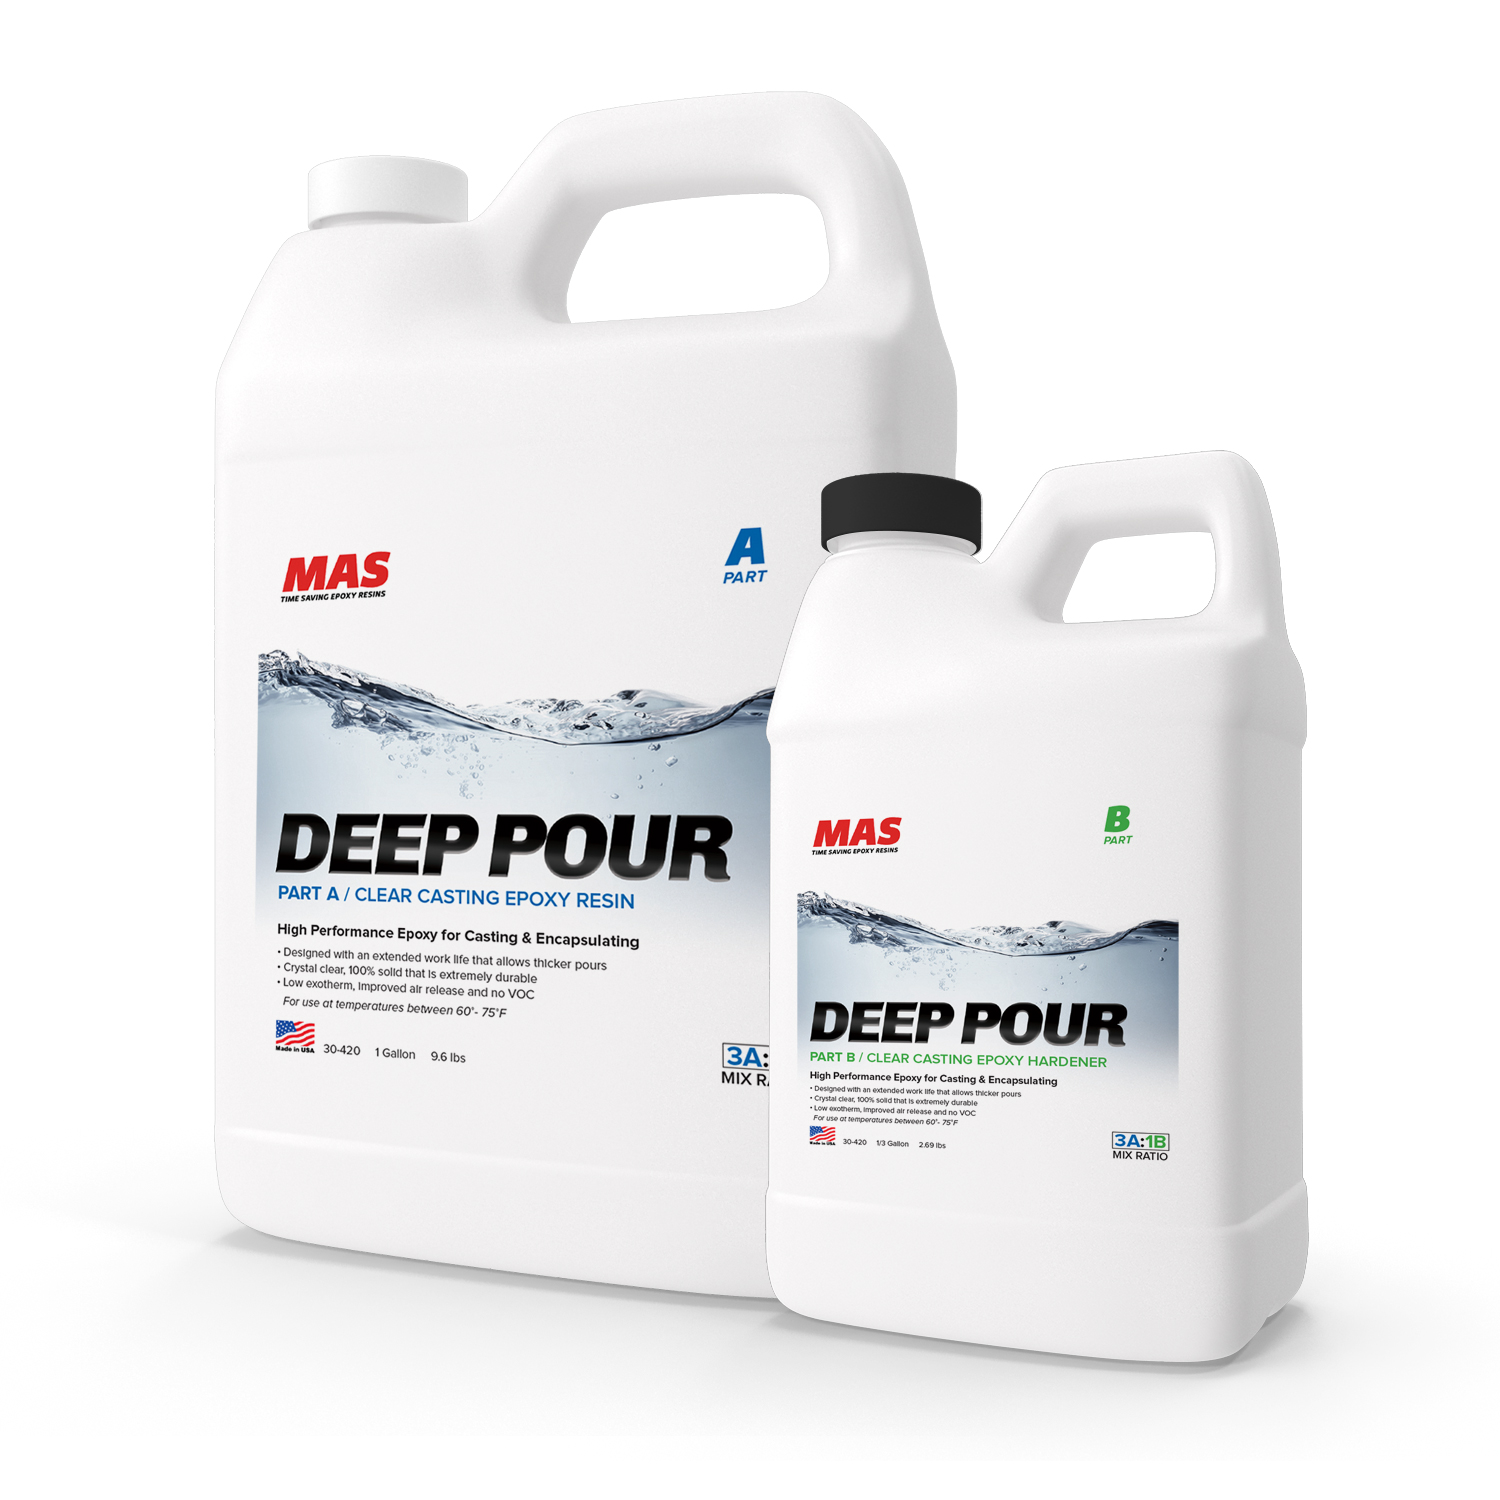 what is the mix ratio of deep pour by WEIGHT?